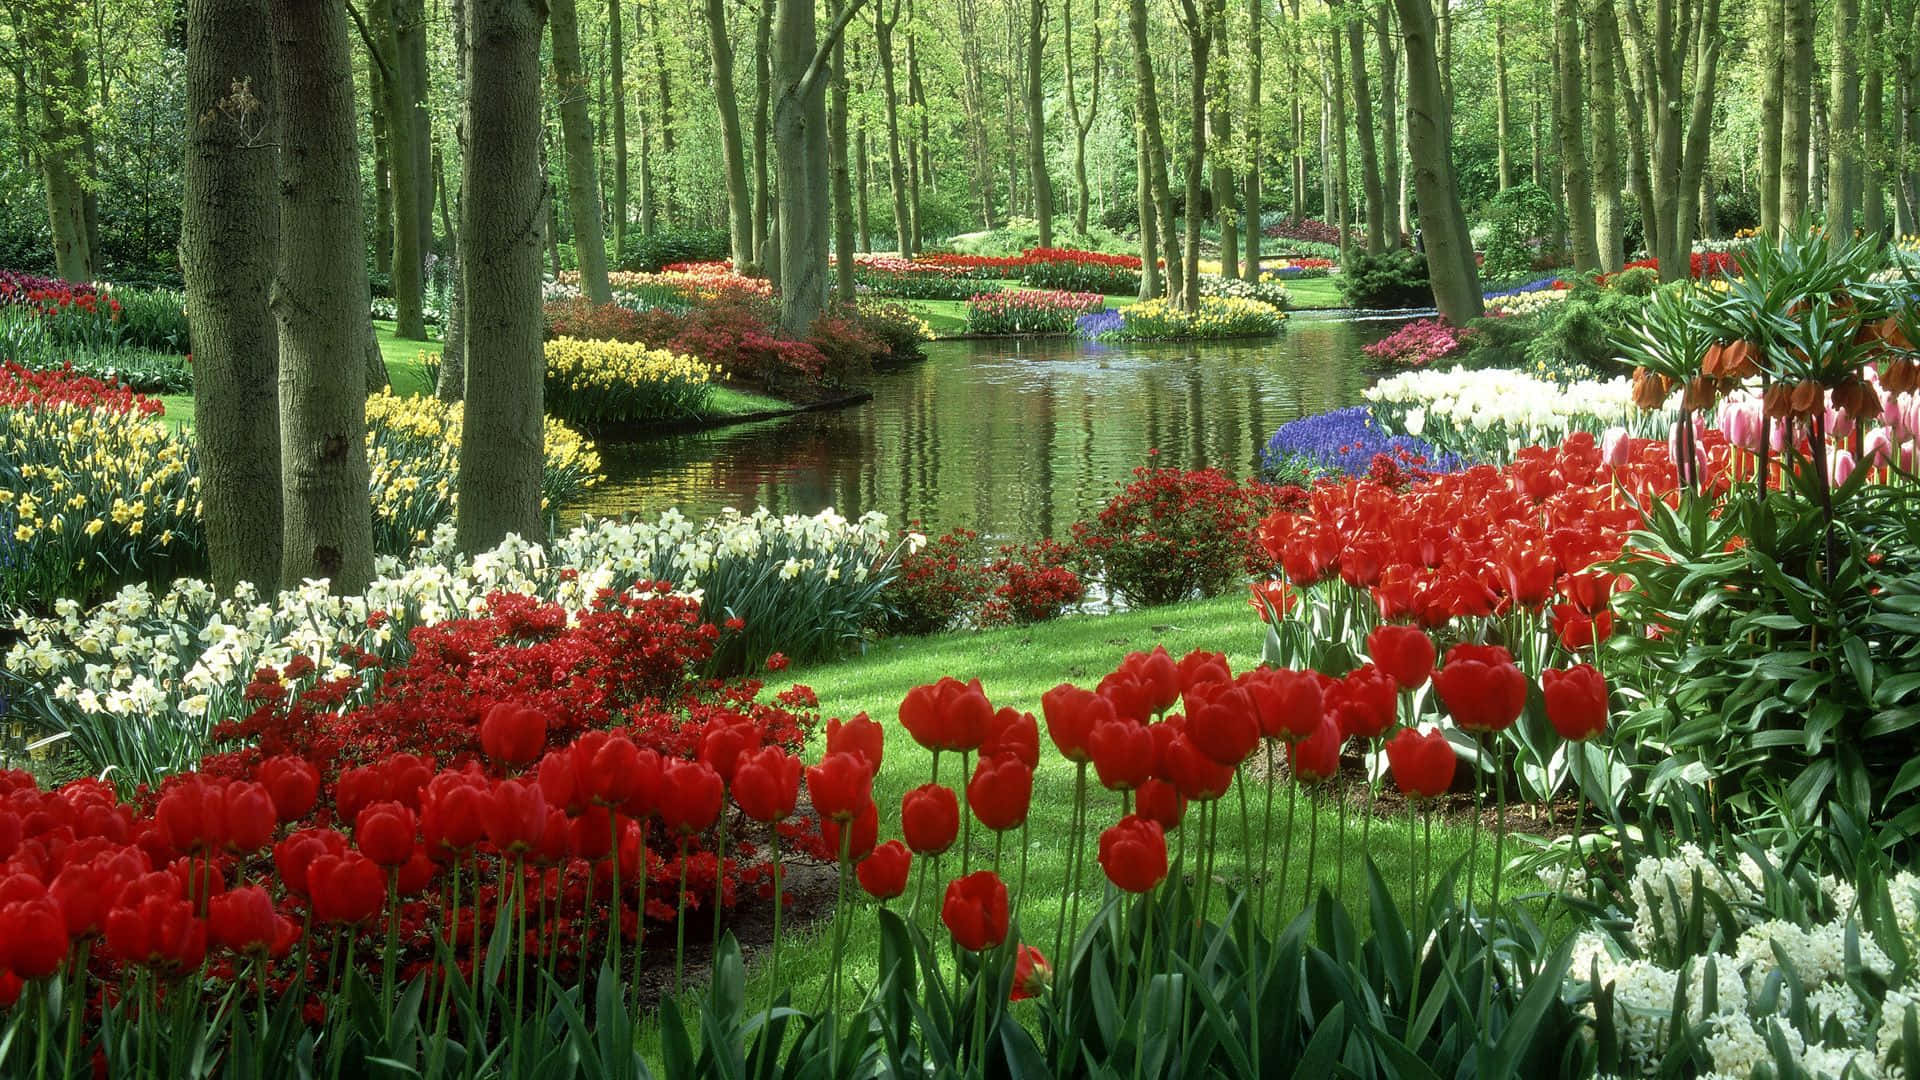 Enjoy the beauty of spring nature!